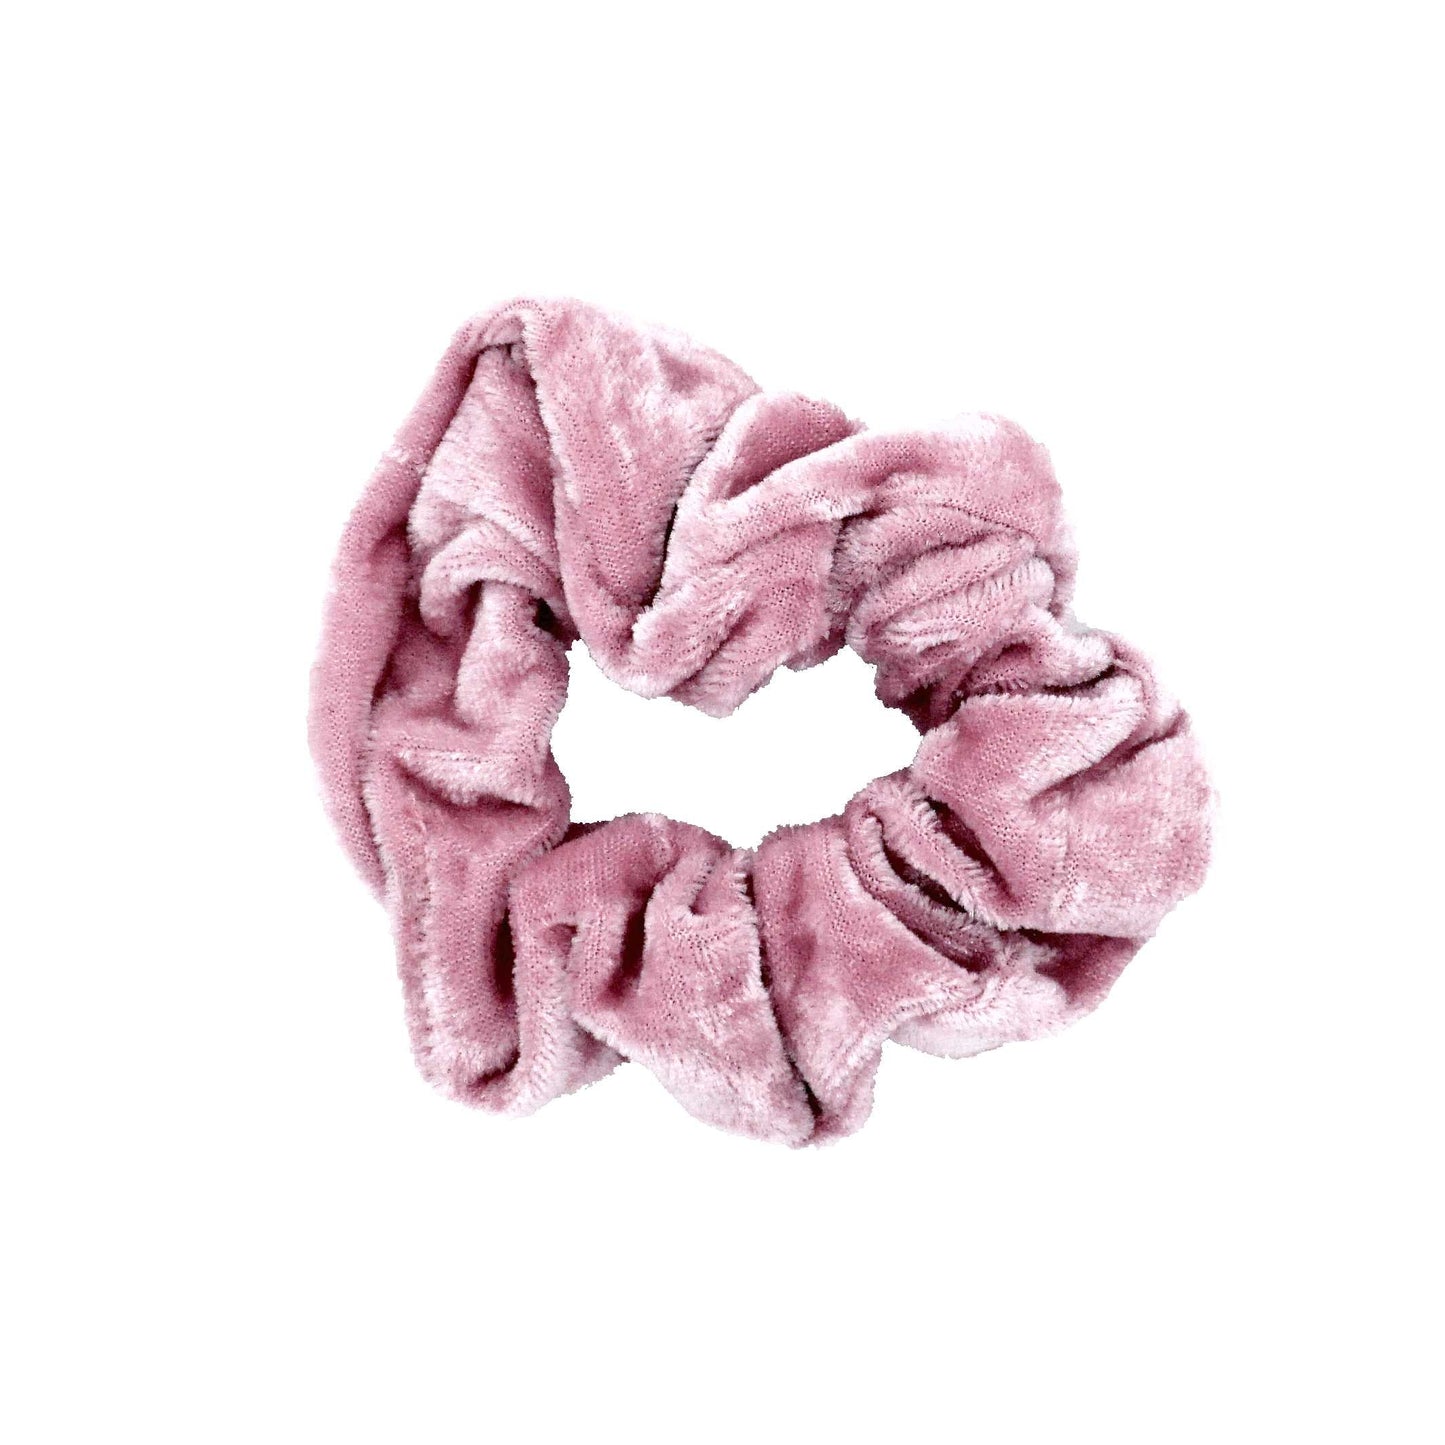 Amelia Beauty Products, Pink Velvet Velvet Scrunchies, 3.5in Diameter, Gentle on Hair, Strong Hold, No Snag, No Dents or Creases. 8 Pack - 12 Retail Packs